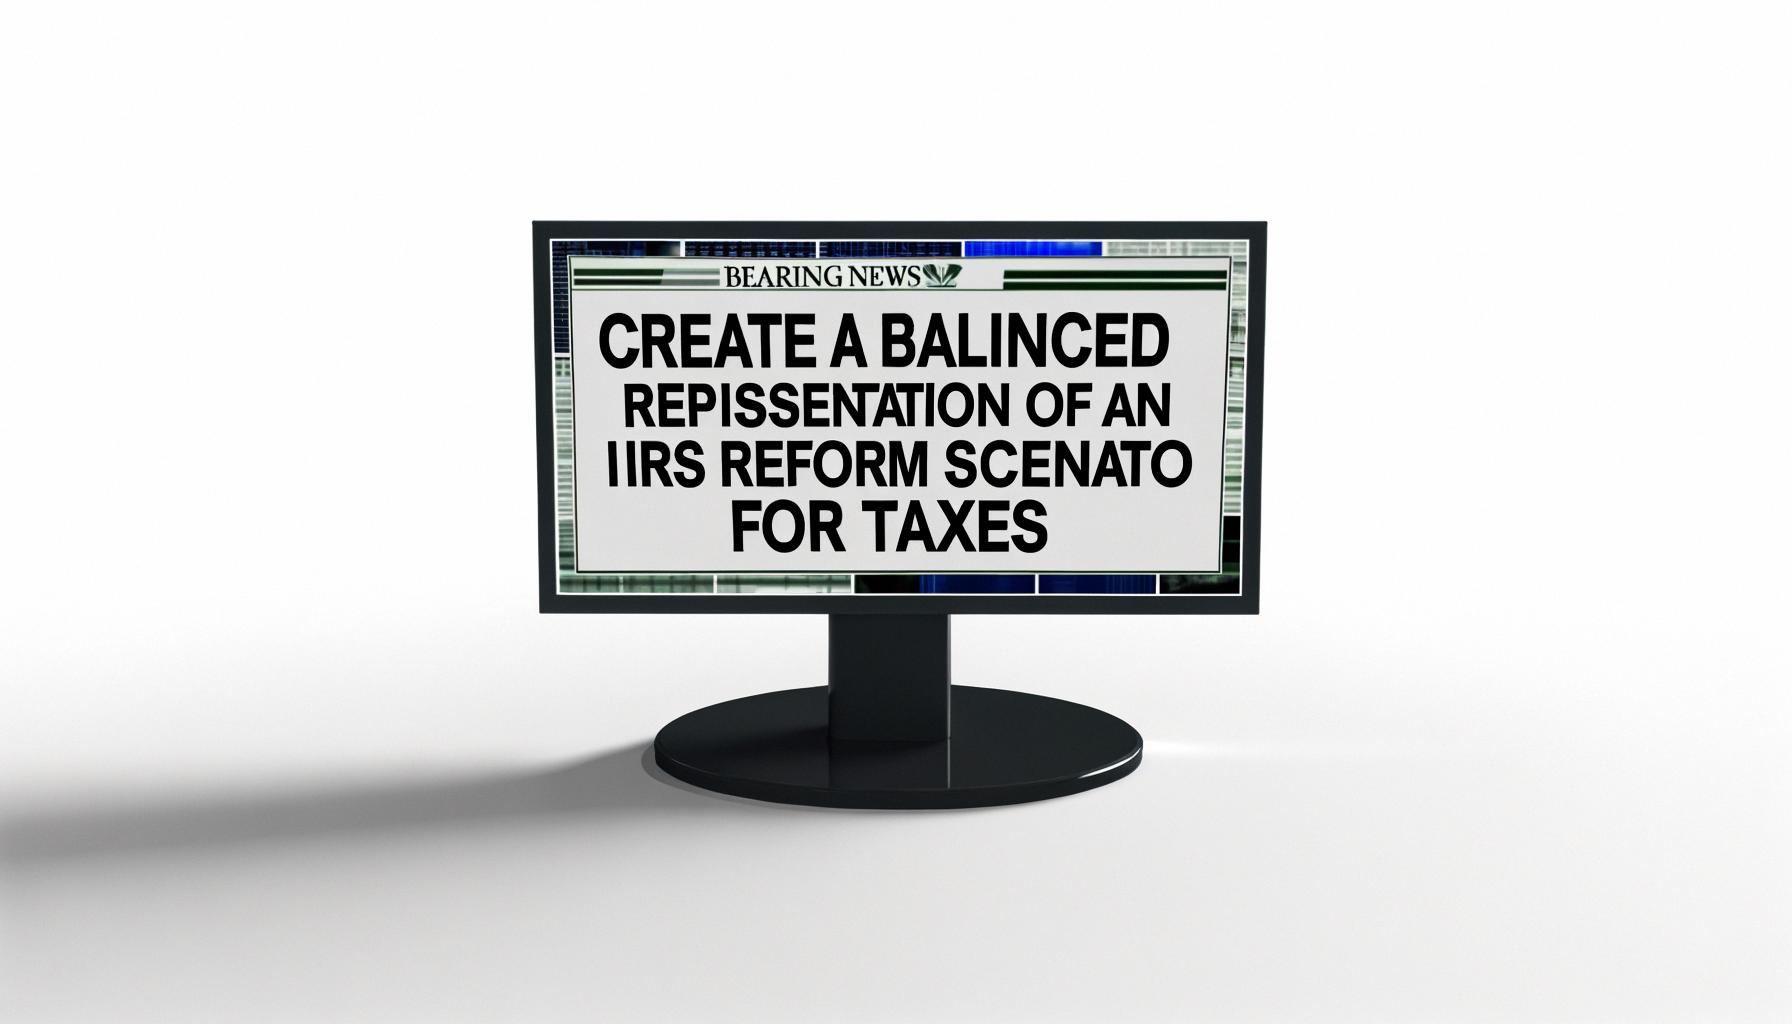 IRS reforms aim to modernize and improve efficiency.